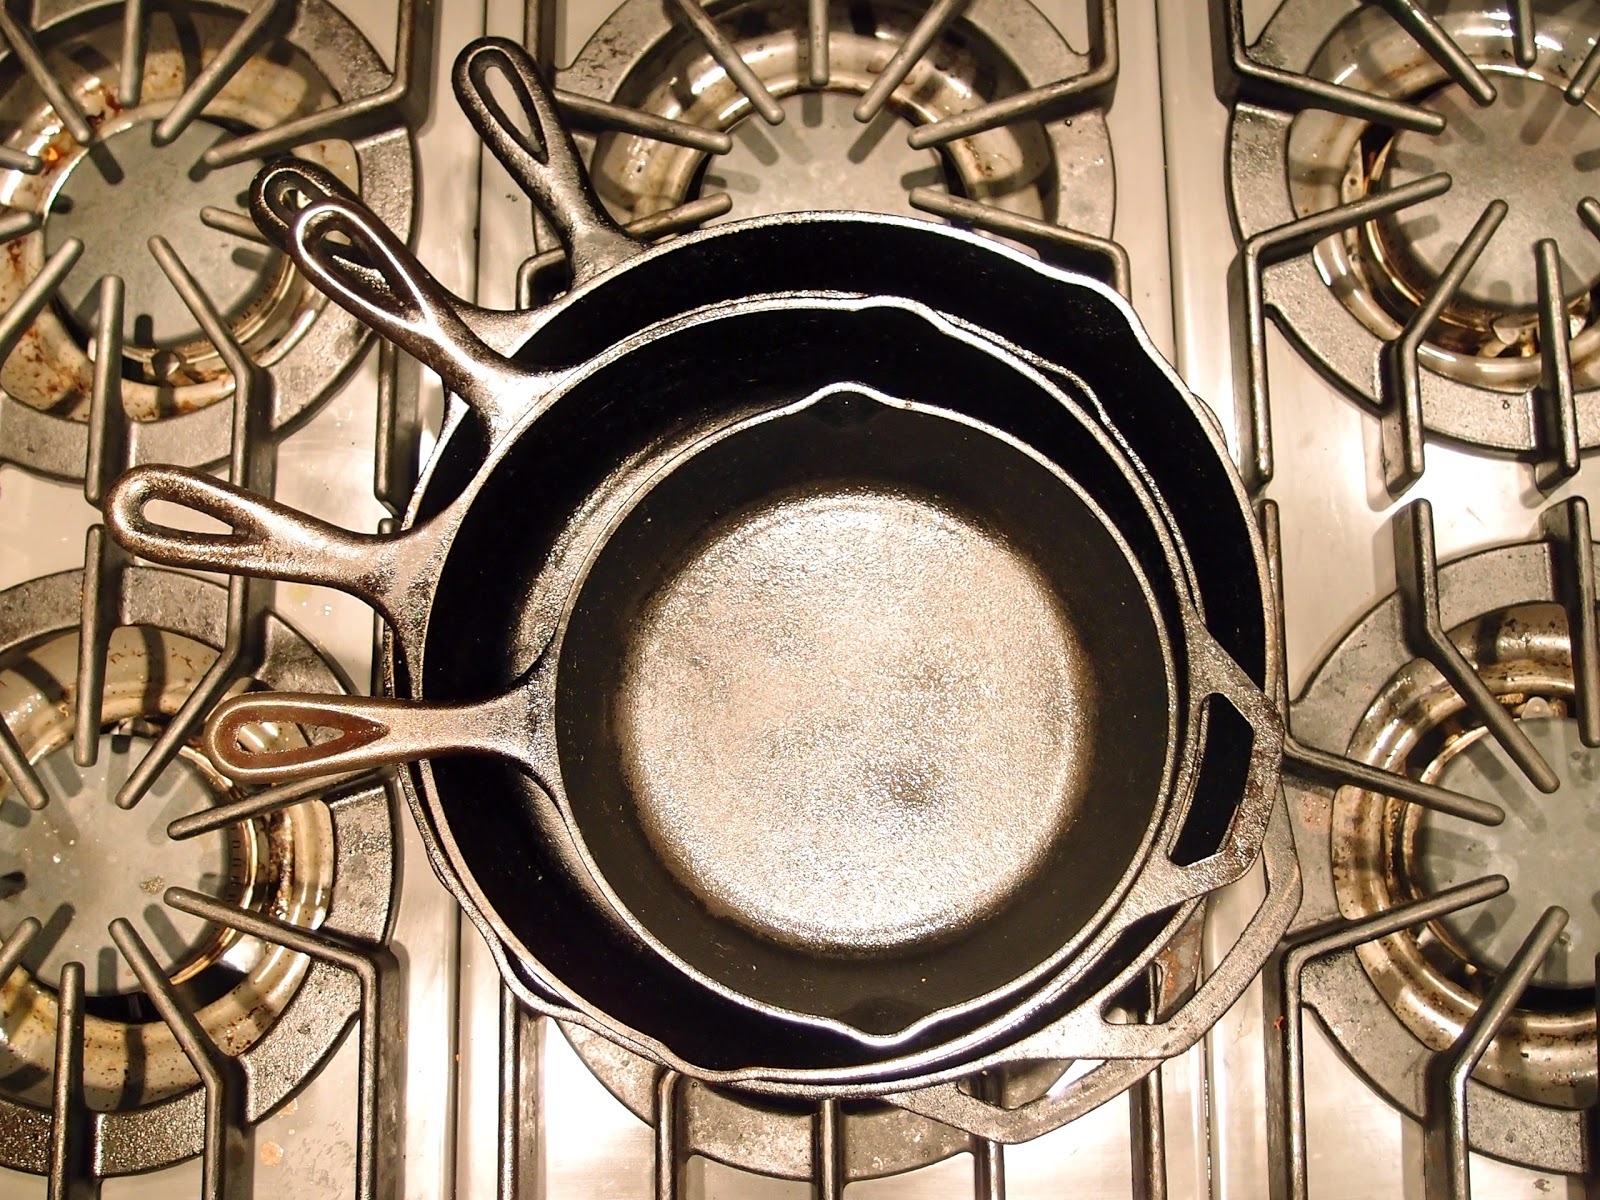 How to Season a Cast Iron Skillet (Oven and Stovetop!)